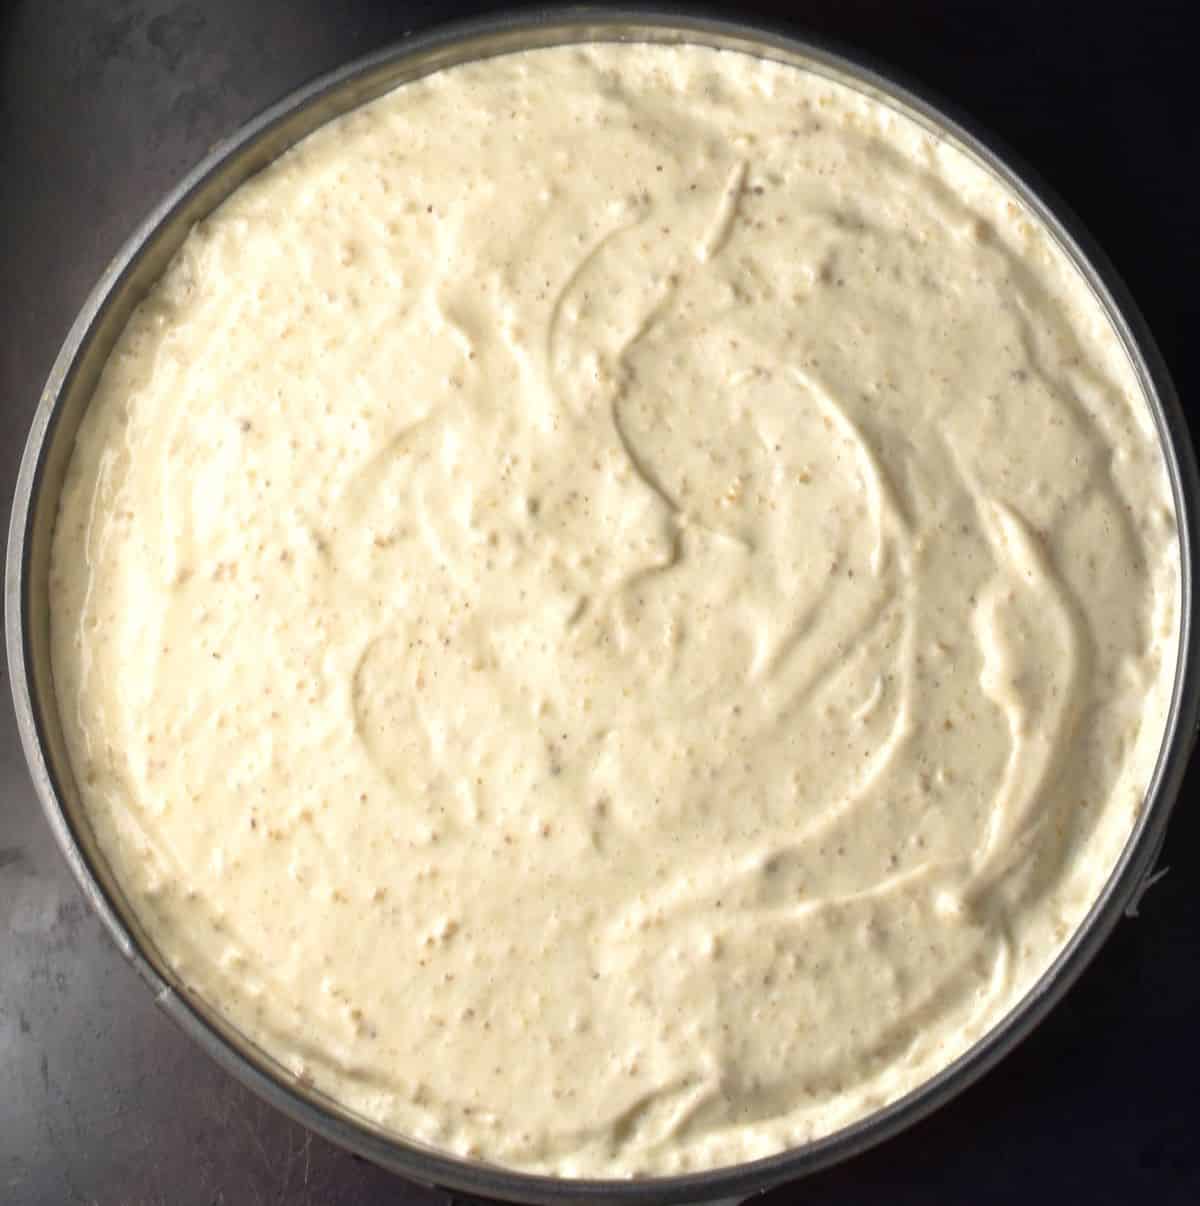 Top down view of cake batter in round pan.